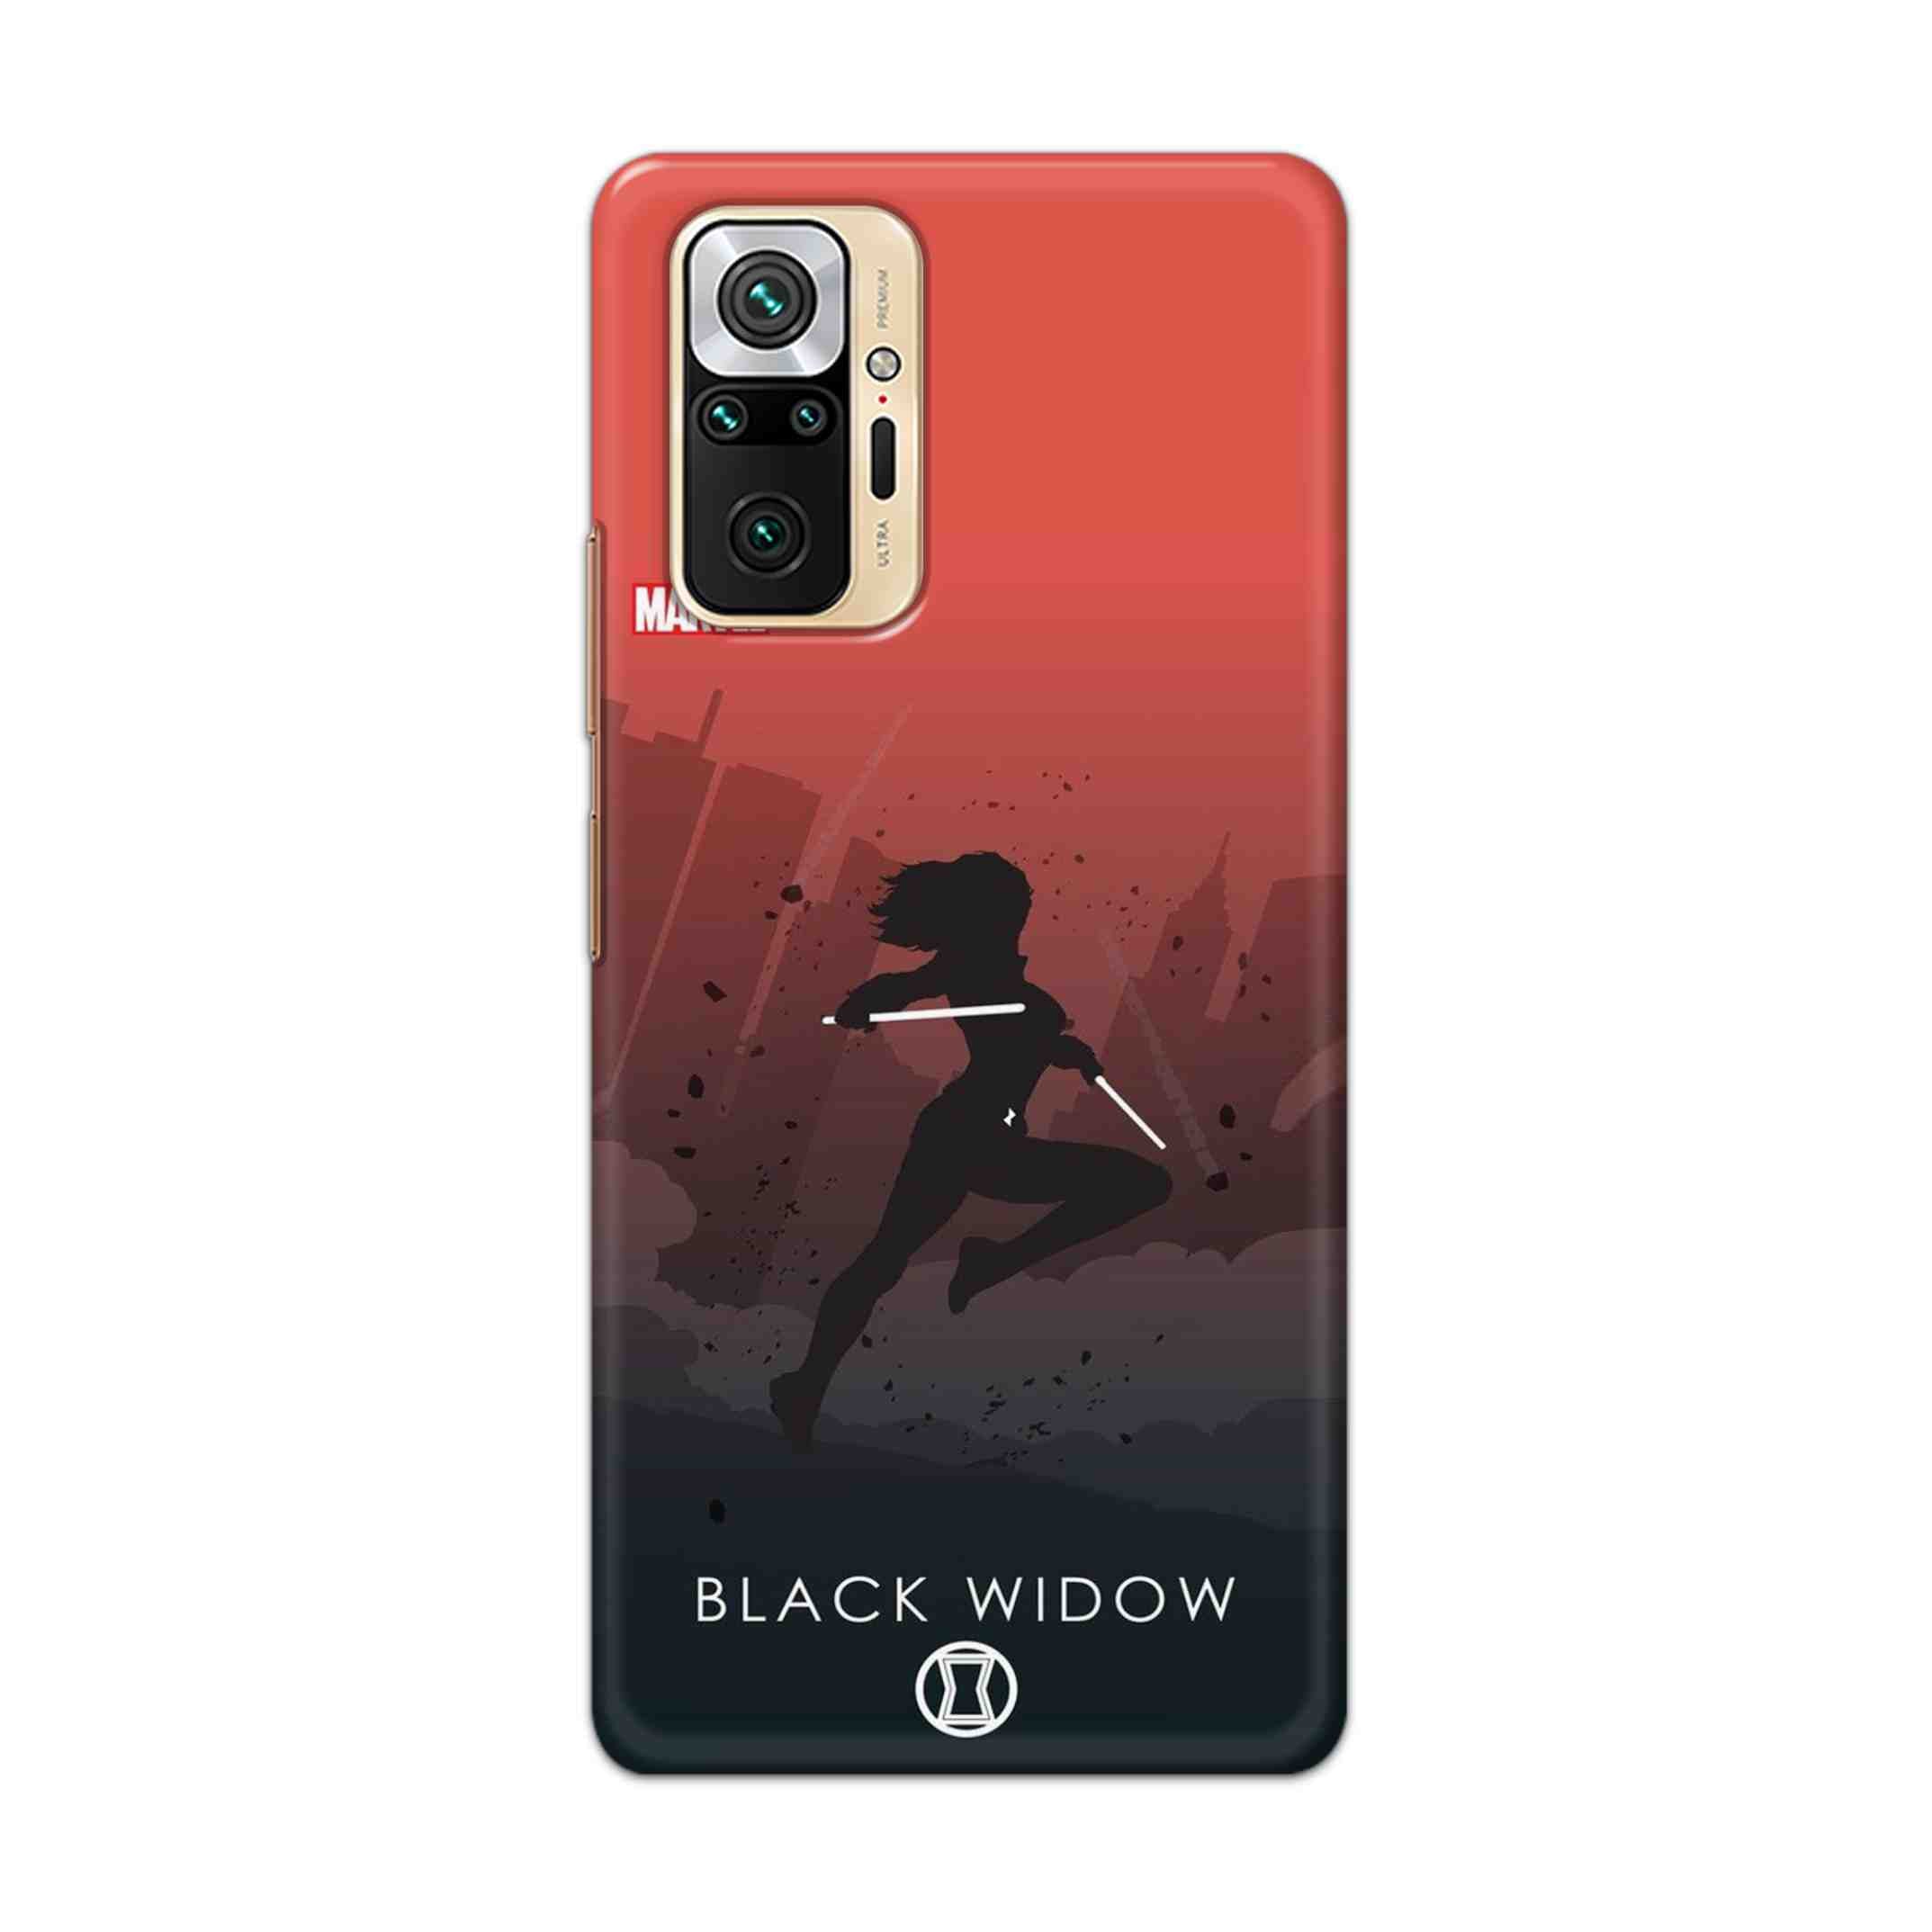 Buy Black Widow Hard Back Mobile Phone Case Cover For Redmi Note 10 Pro Online